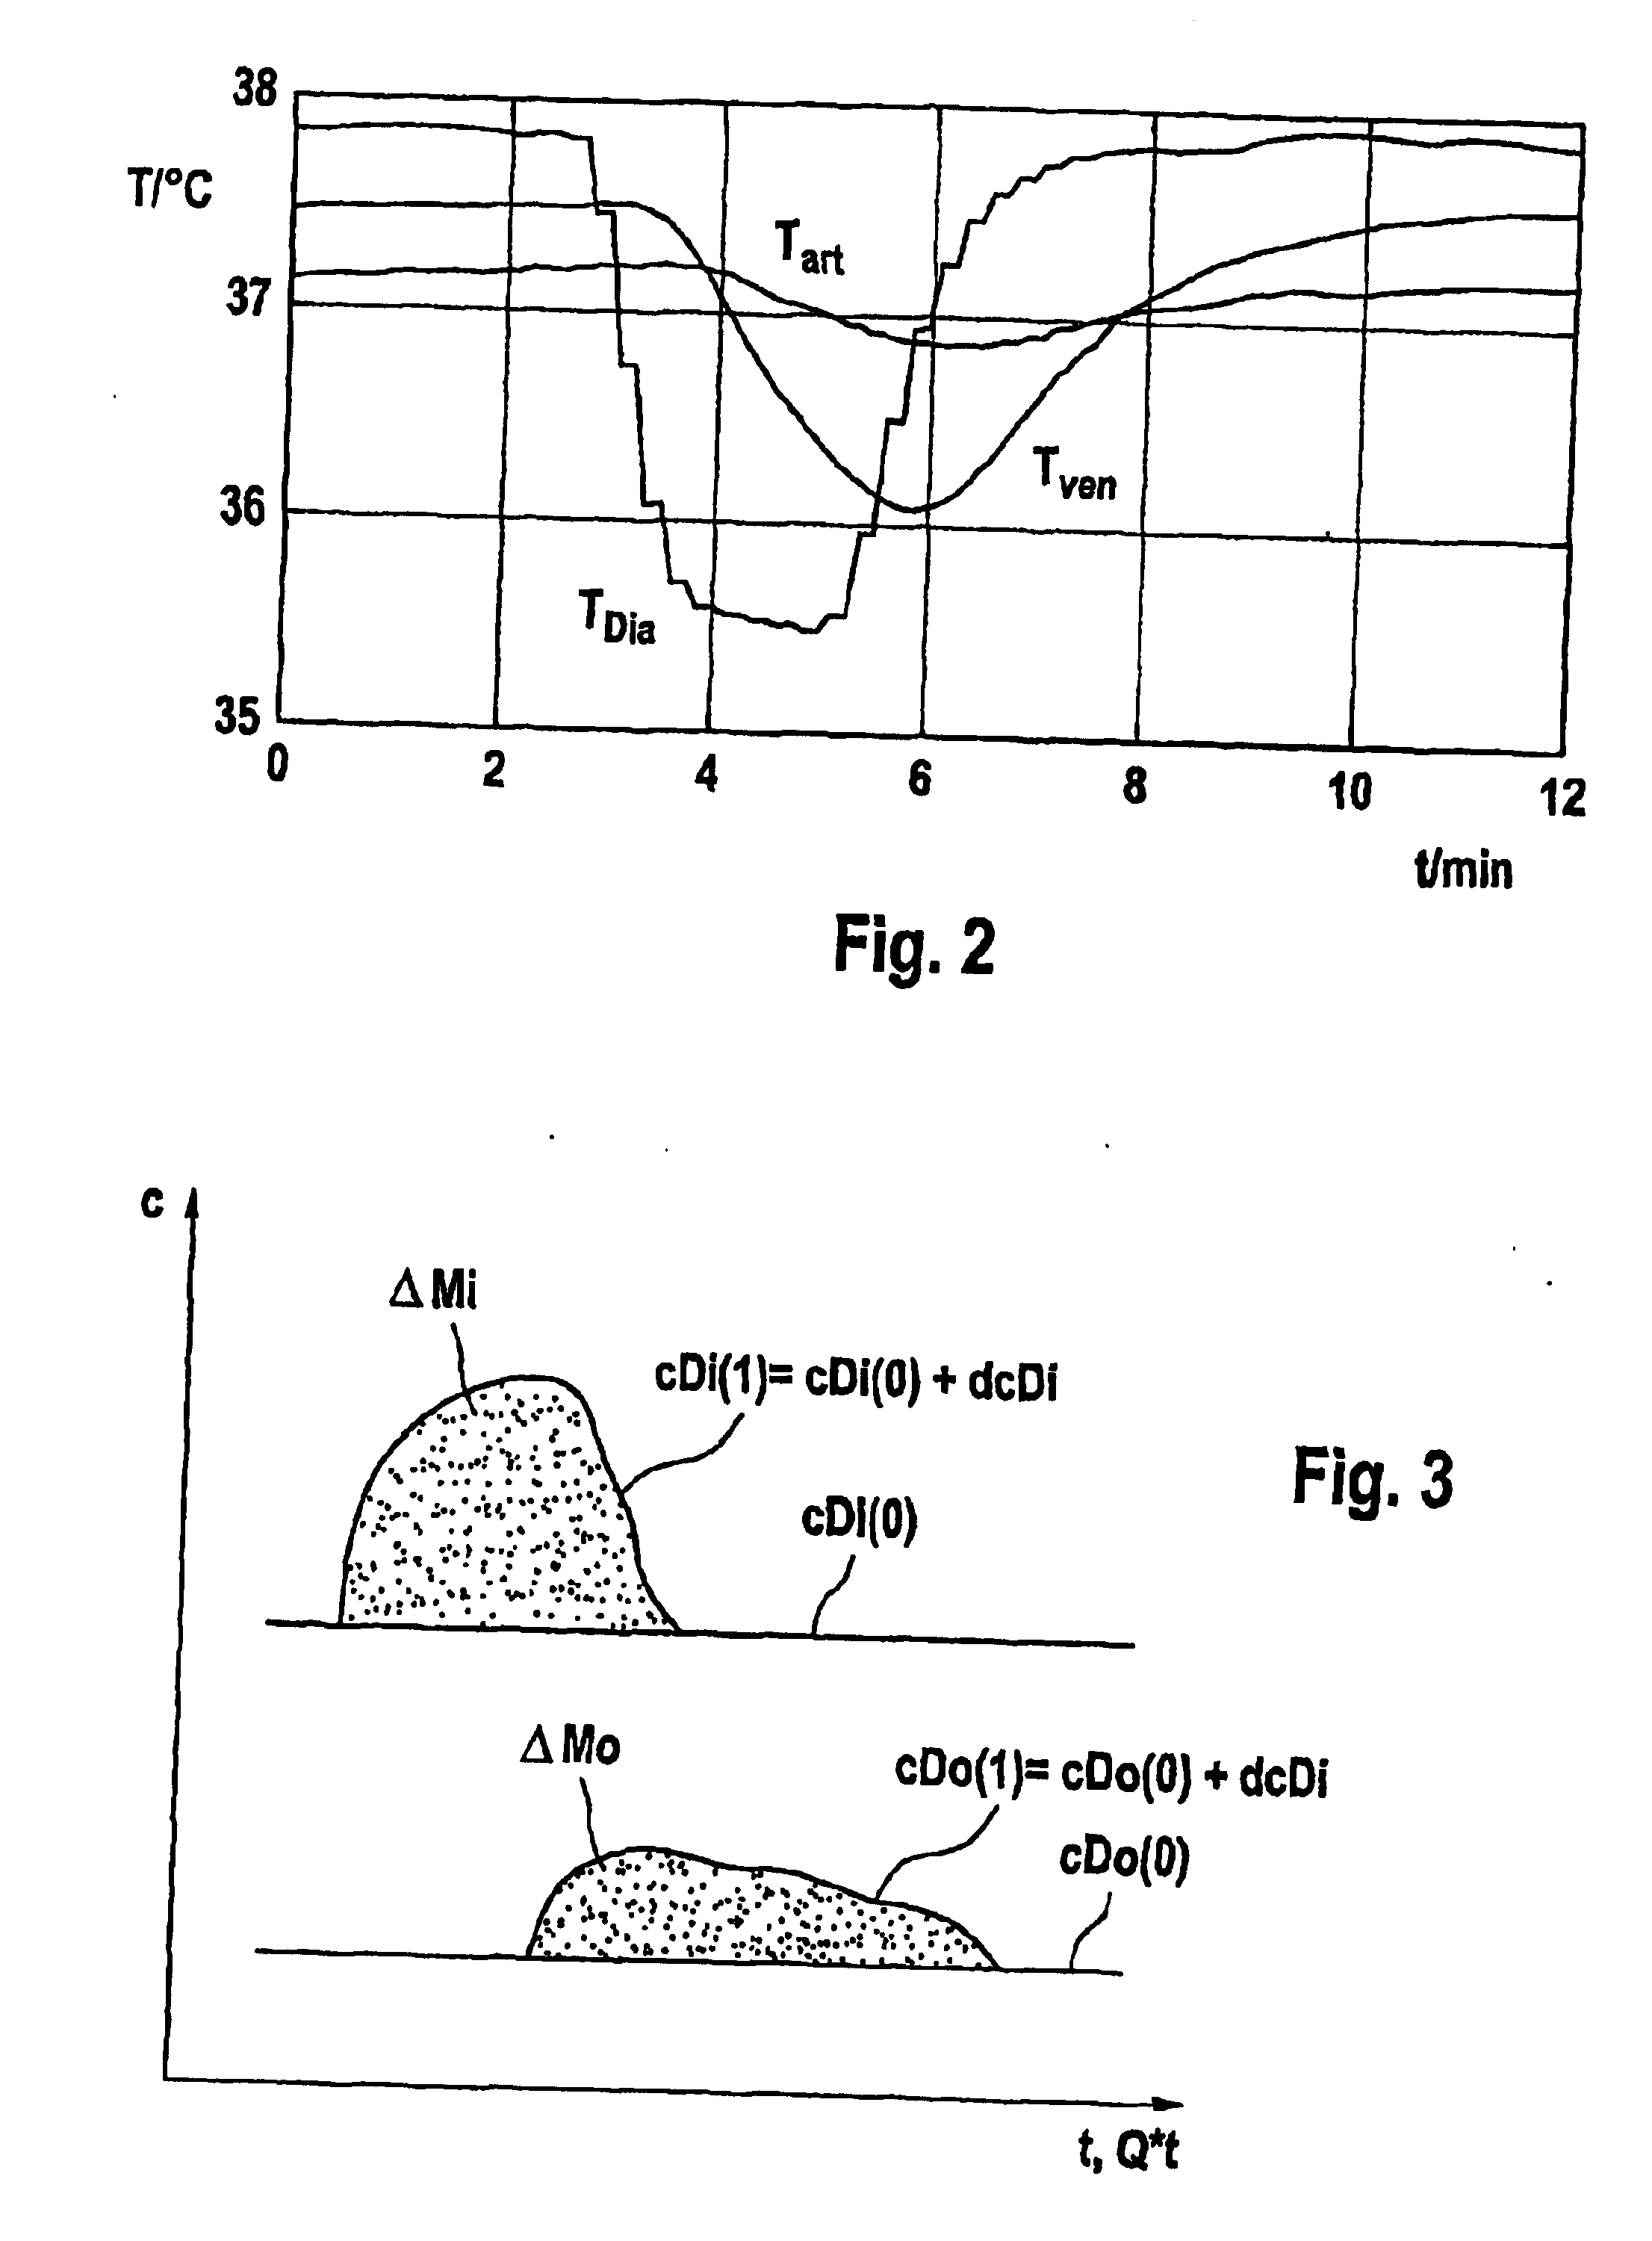 Device and Method for Detecting Complications During an Extracorporeal Blood Treatment